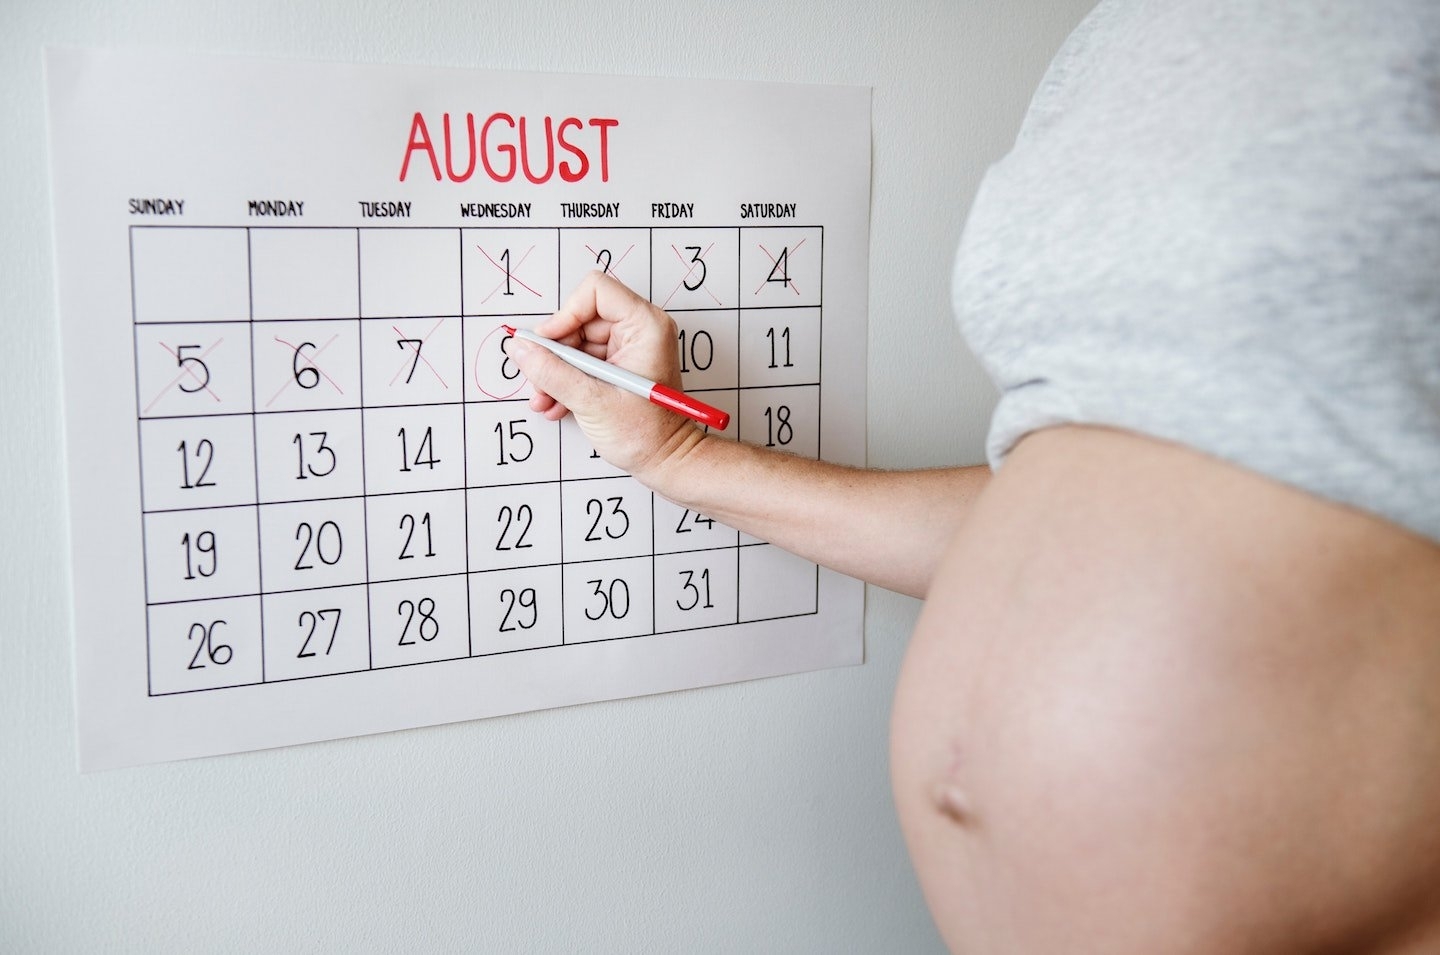 Due Date Calculator: The Most Precise Conception Calculator with regard to Pregnancy Calendar Month By Month With Image